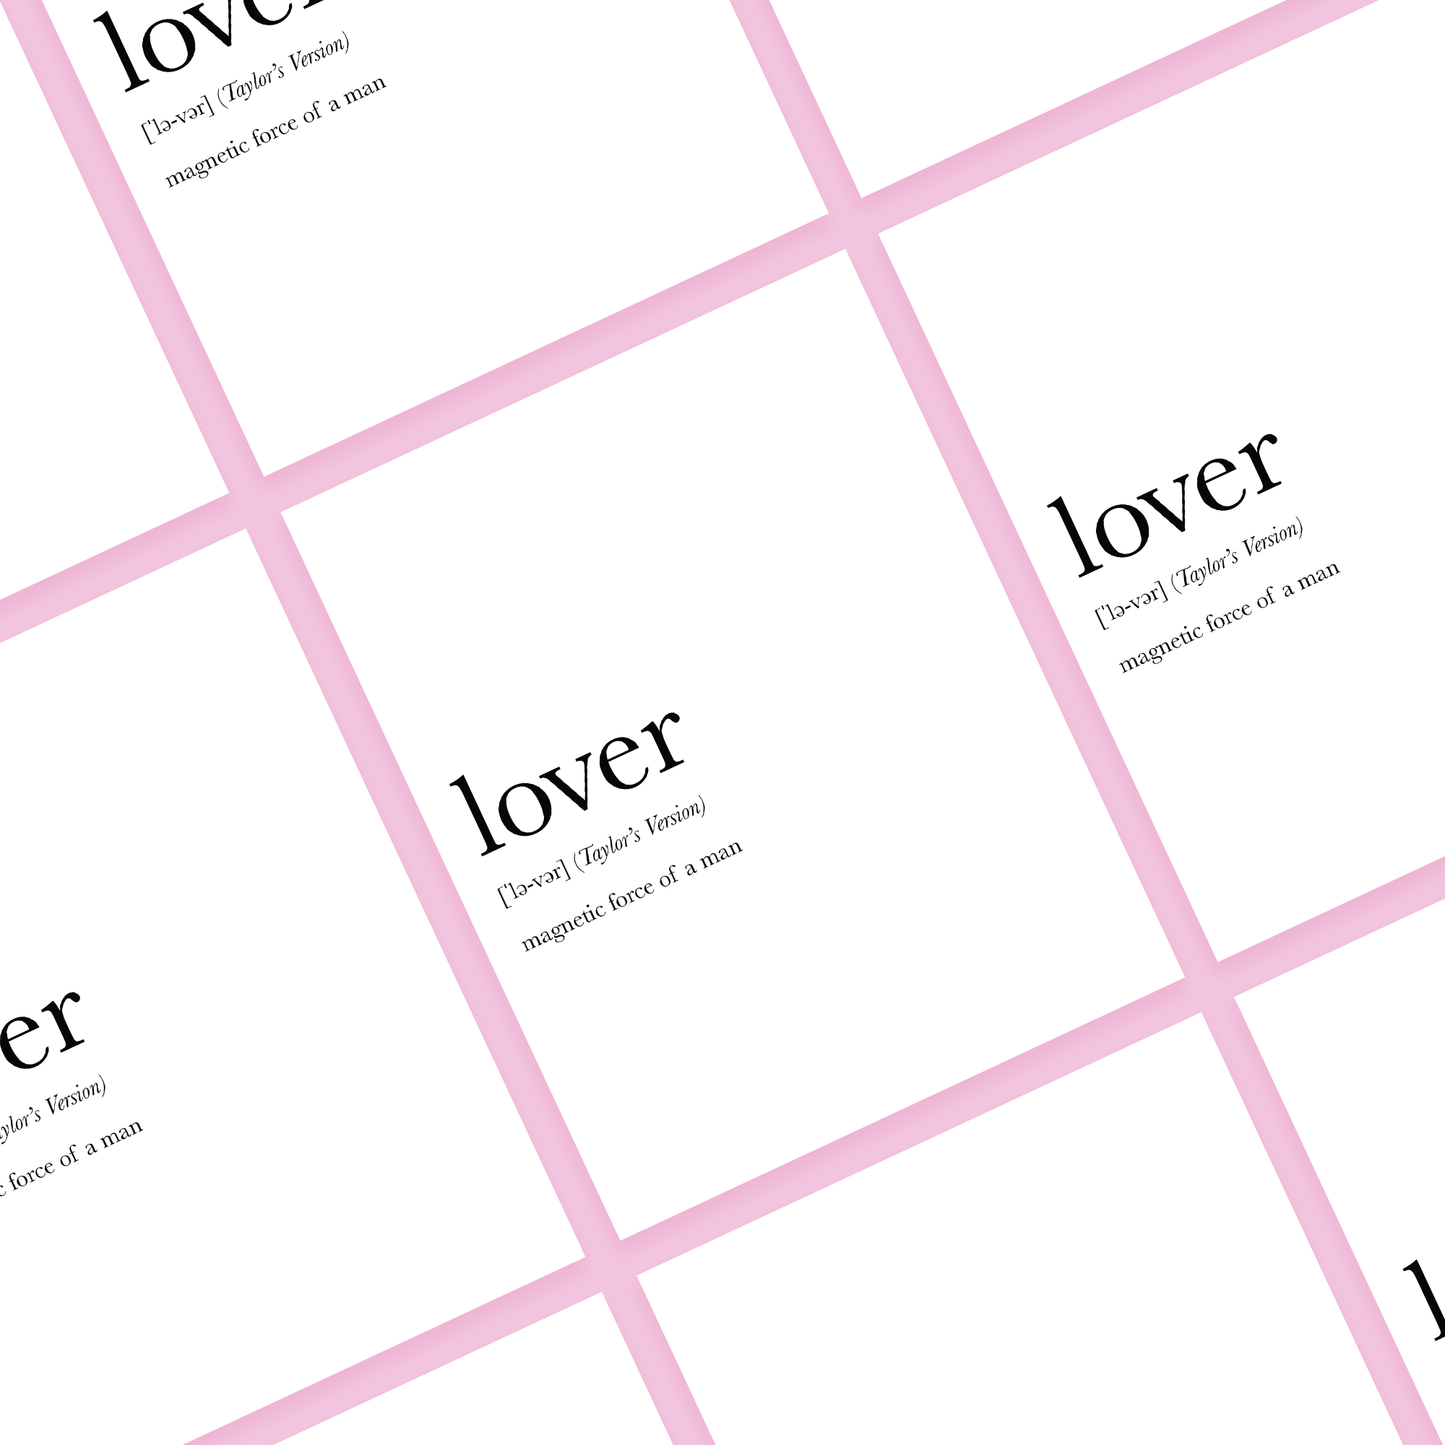 Lover Definition (Taylor's Version) - Taylor Swift Inspired Card